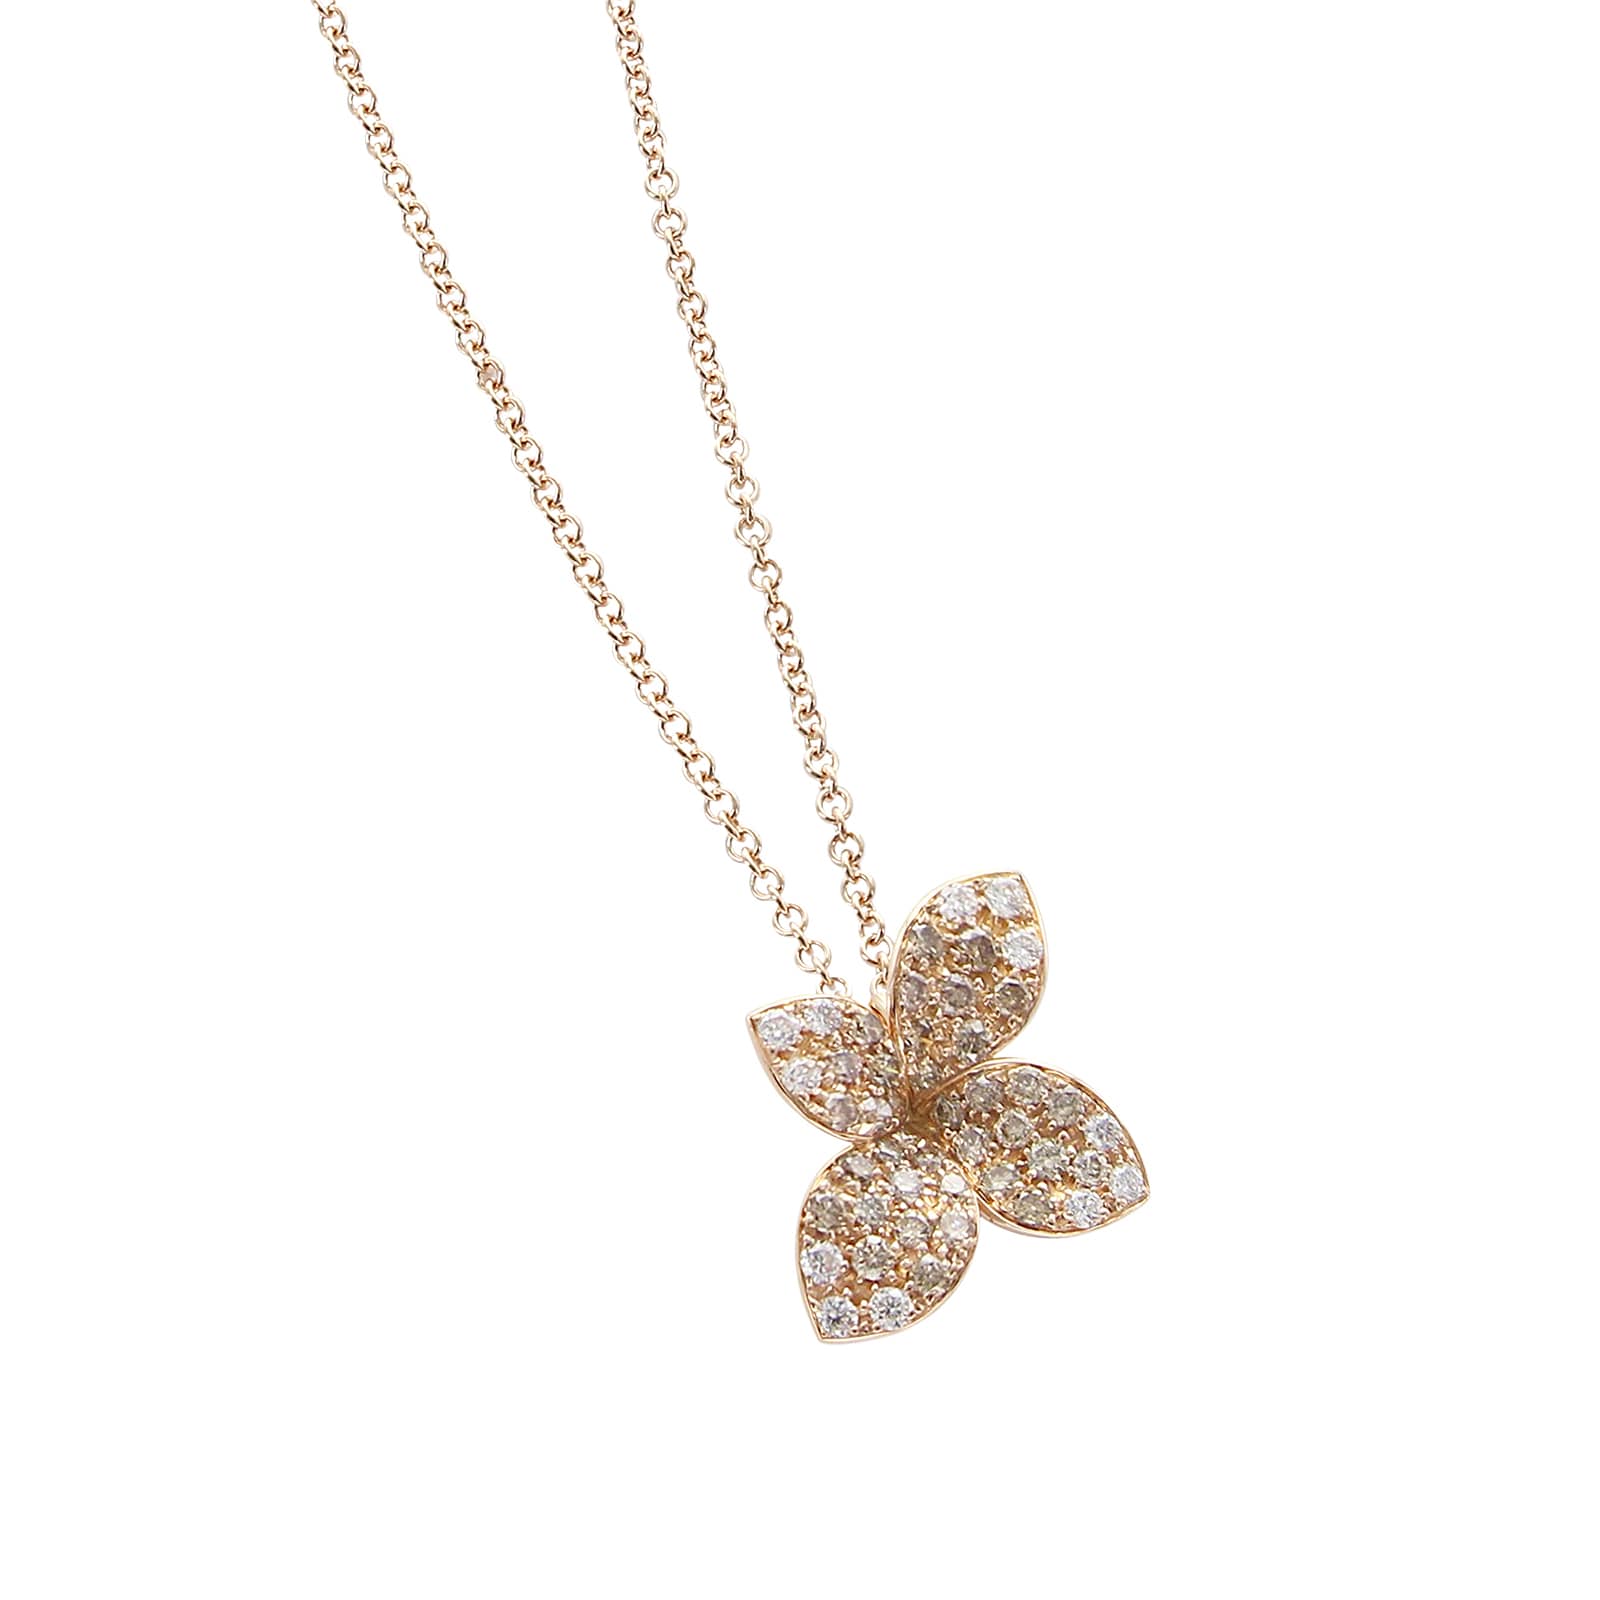 Petit Garden Small Flower Necklace in 18ct Rose Gold with White and Champagne Diamonds